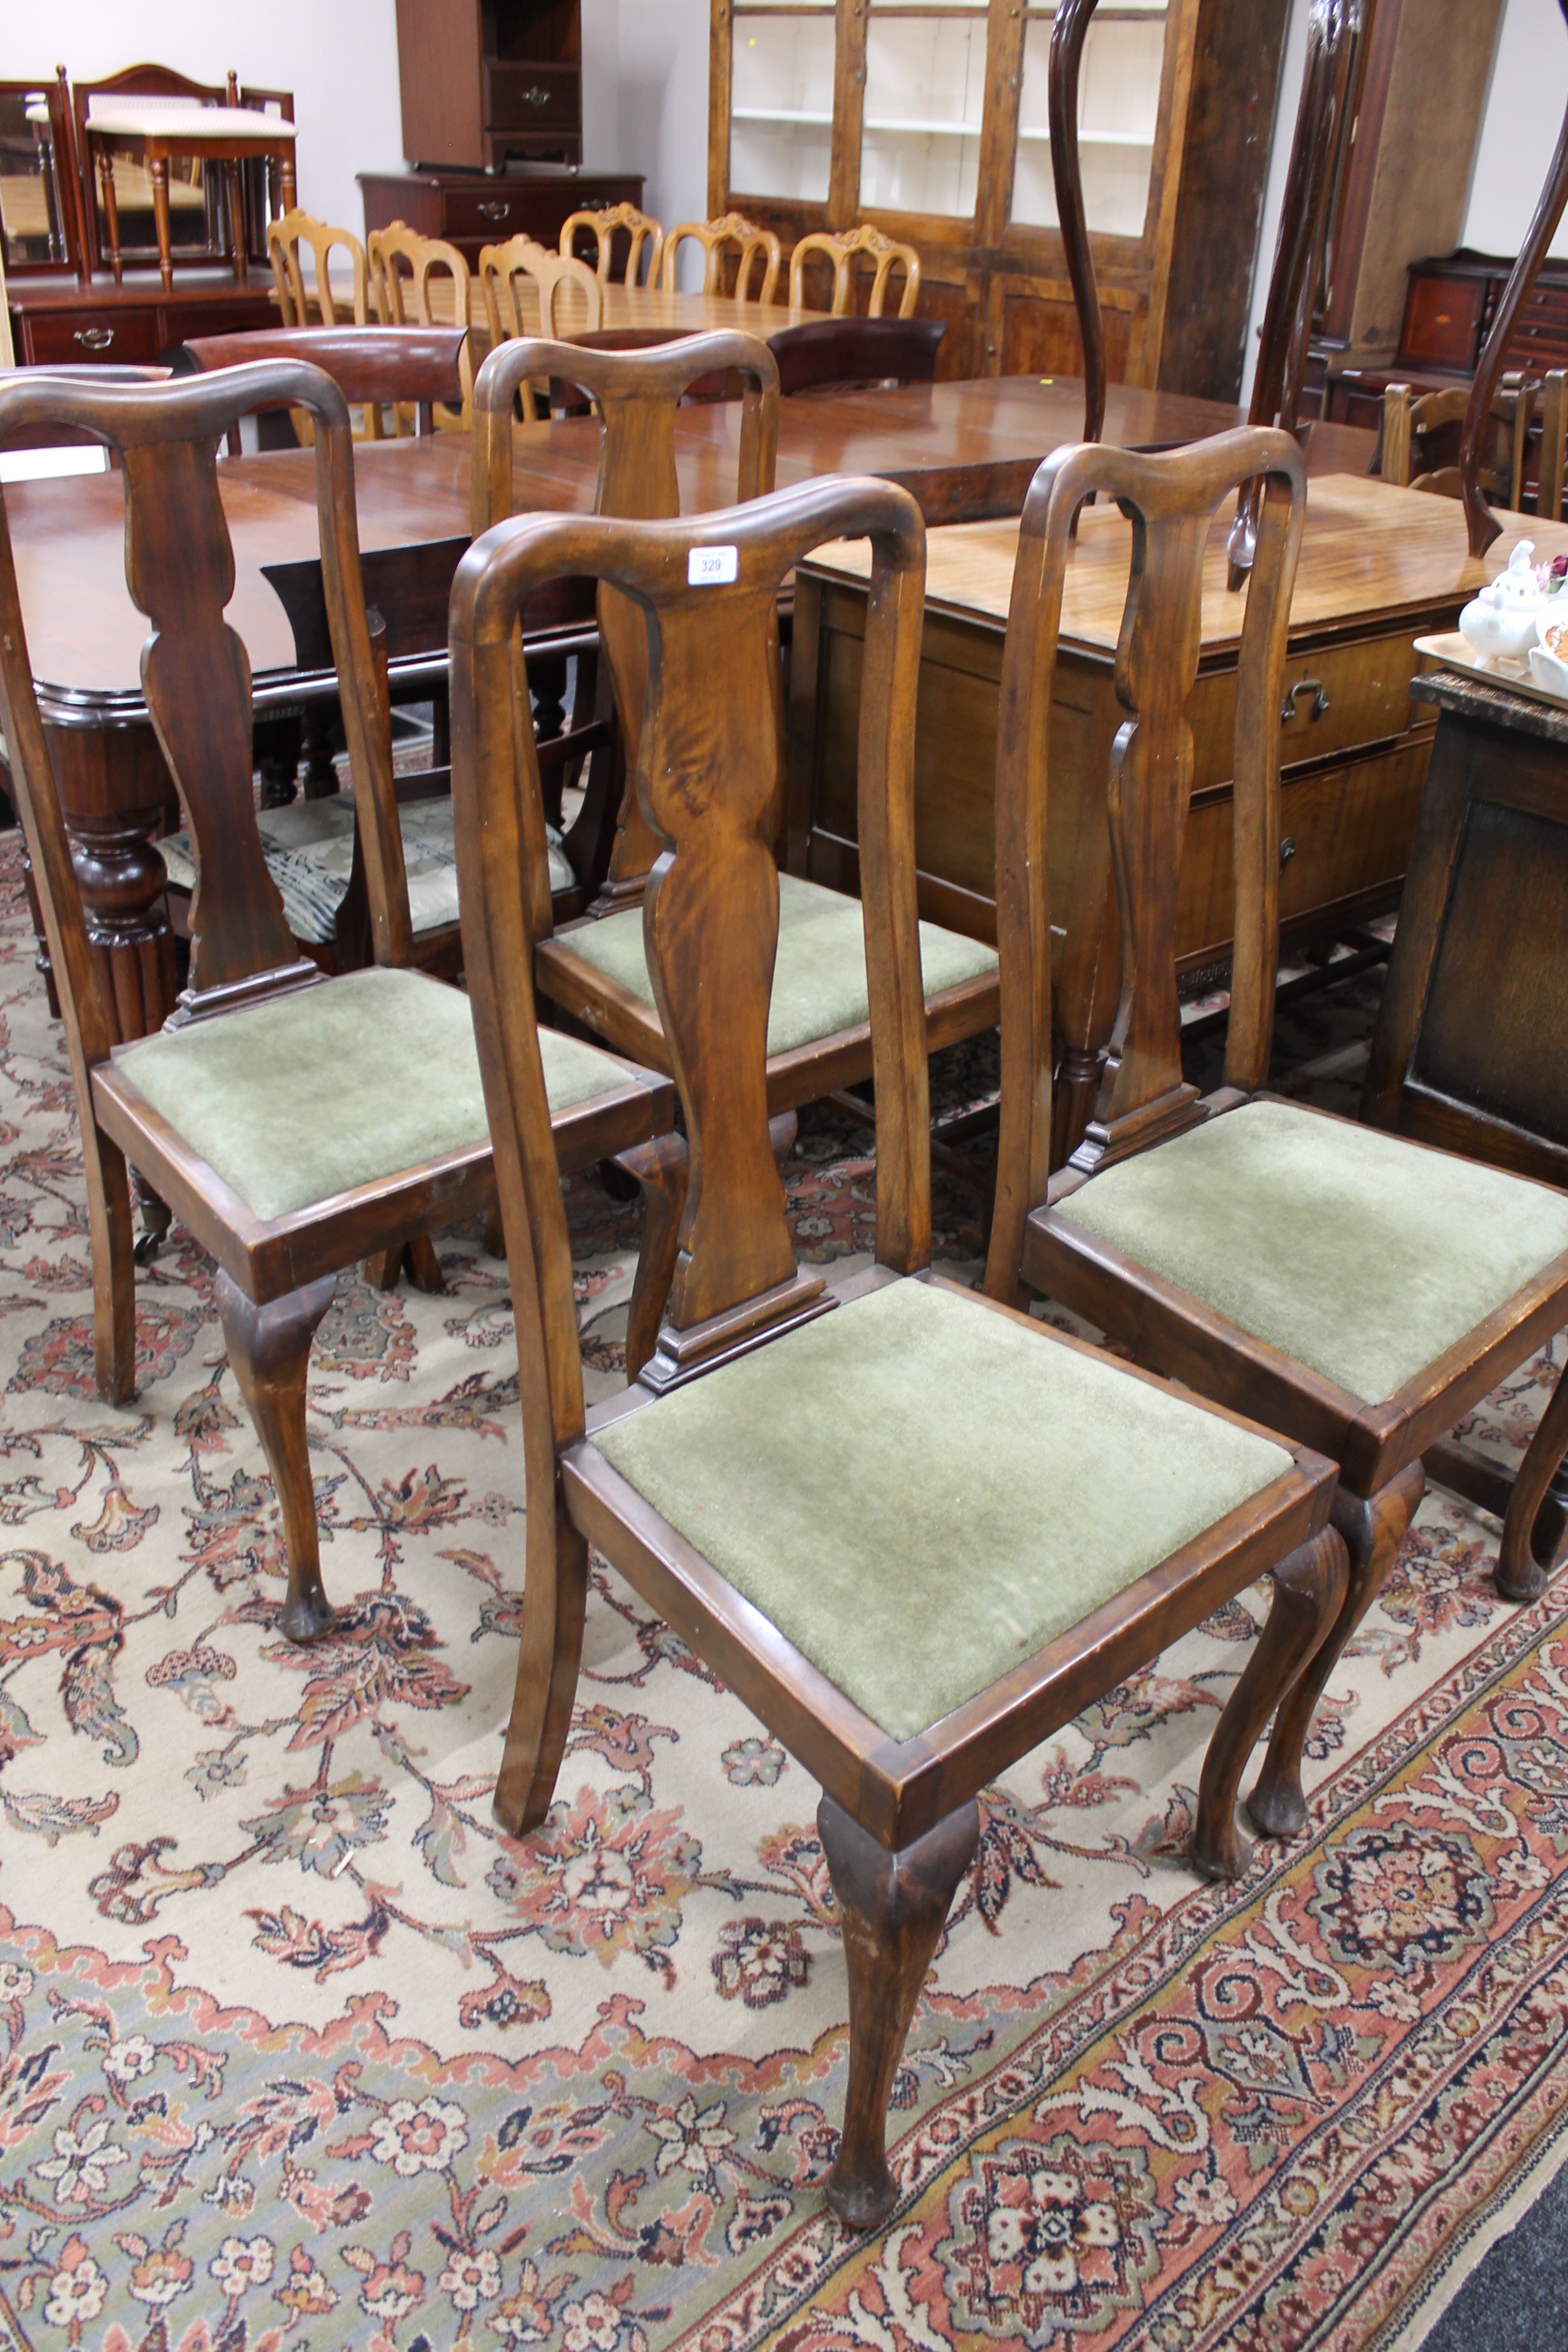 A set of four Queen Anne style dining chairs